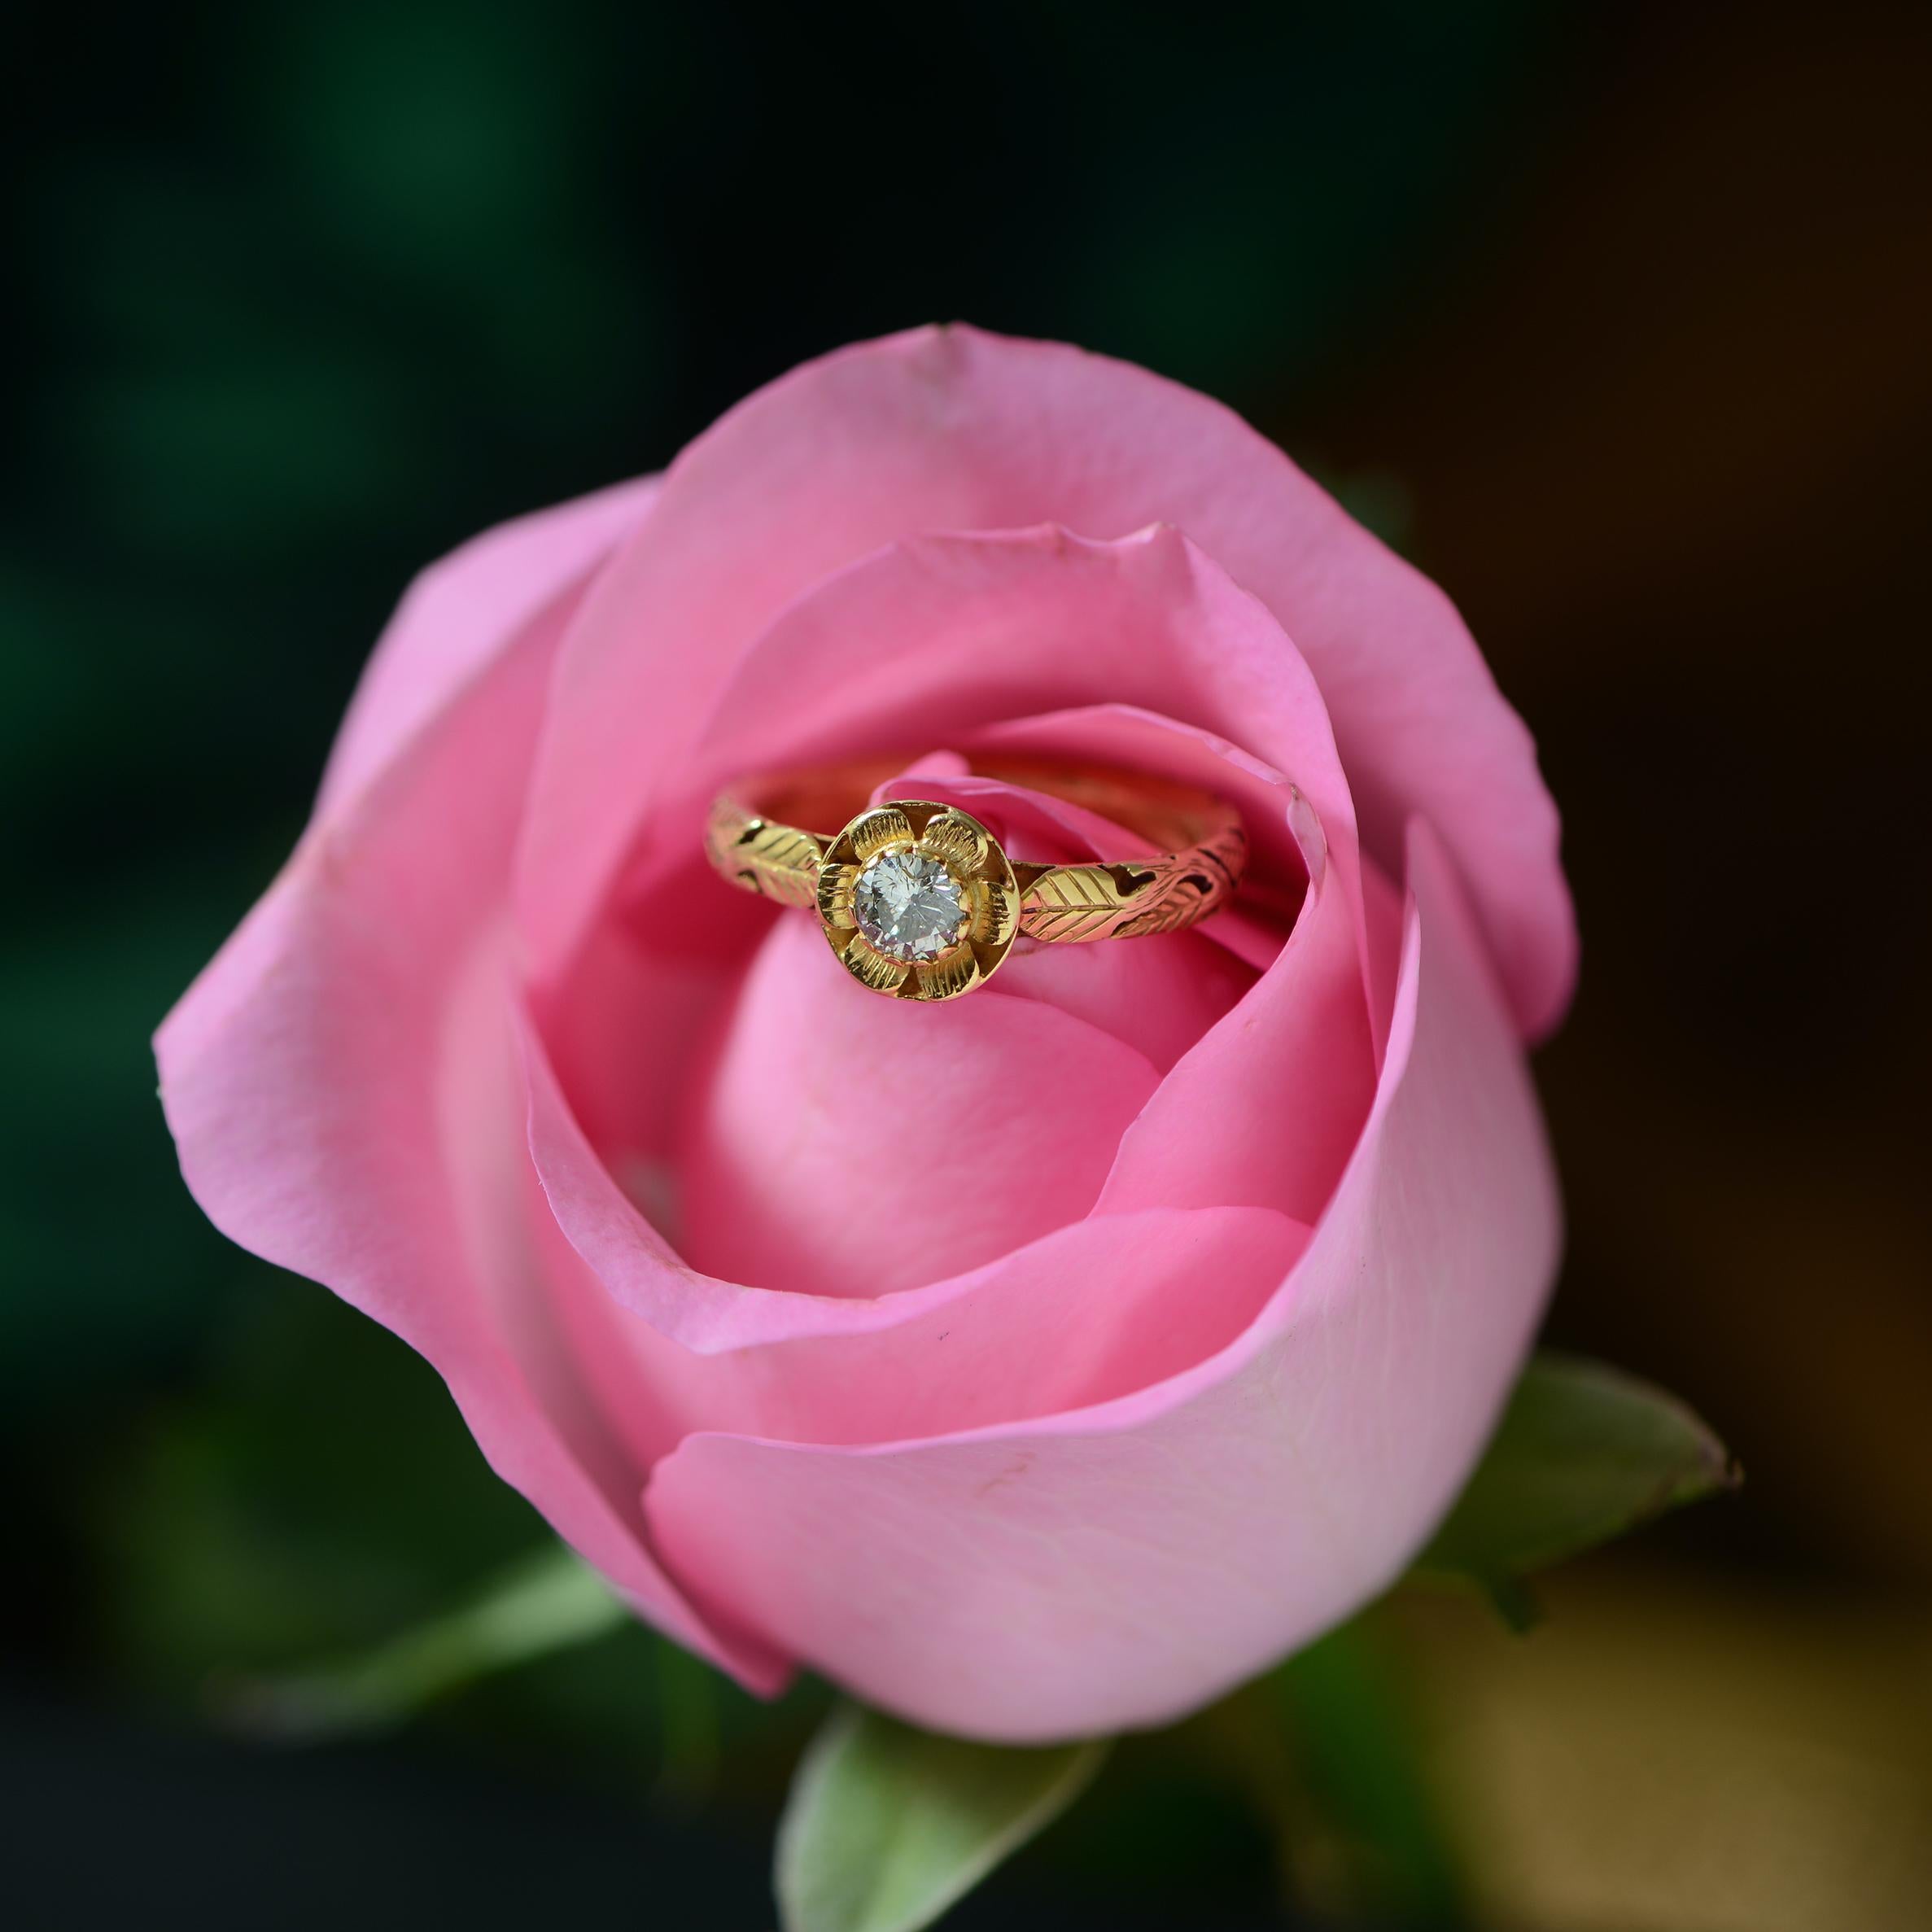 This adorable one of a kind ring Emma Chapman Diamond 18 Karat  Gold Engagement Ring, has been handmade in our workshops. It has a central full cut diamond set in 18k gold. The ring has exquisite hand engraving work on it using floral motifs as has